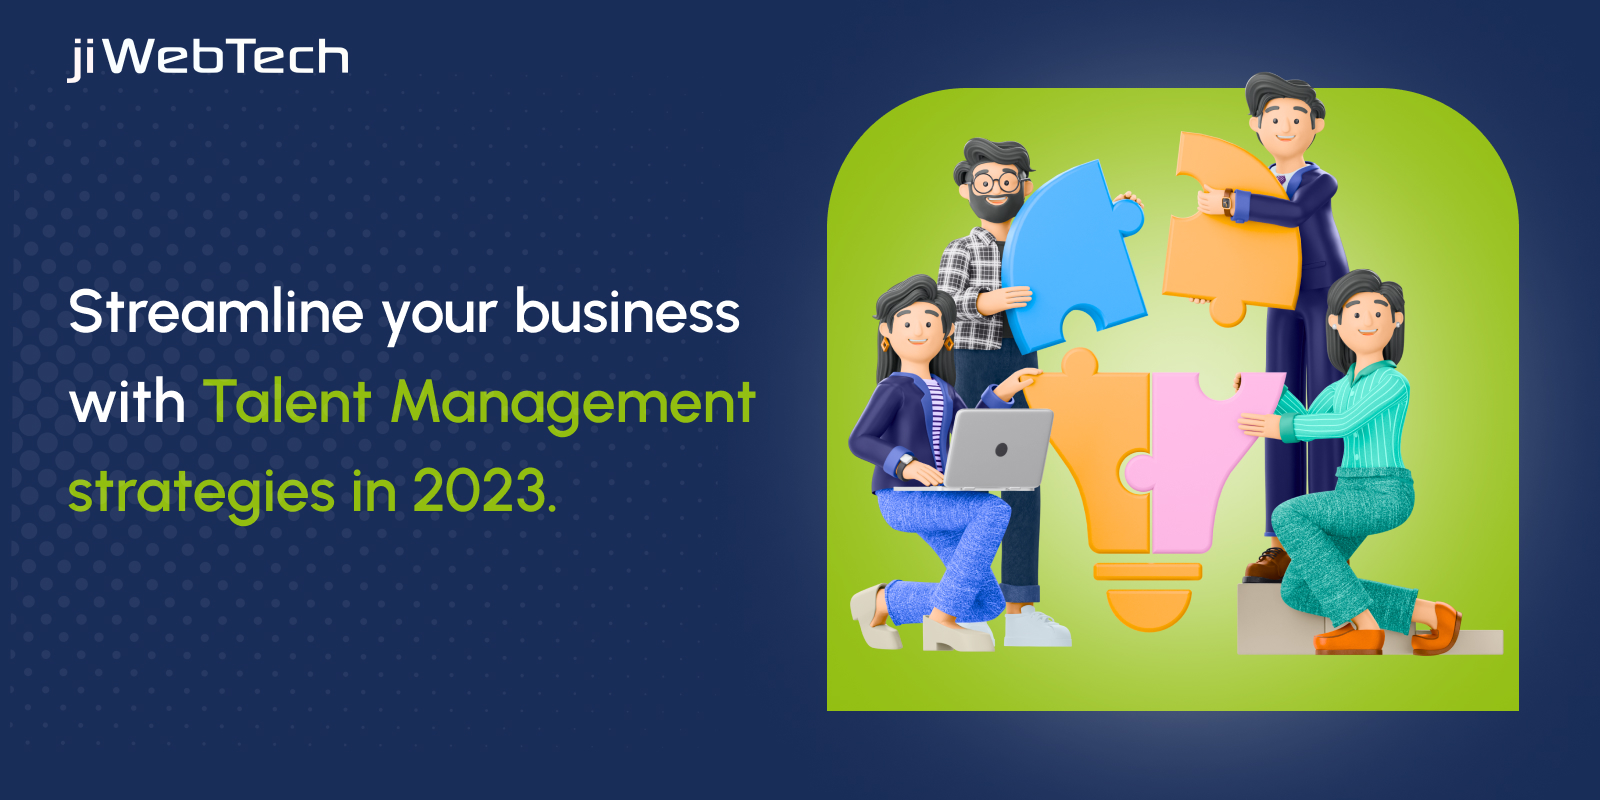 Streamline Your Business With Talent Management Strategies In 2023